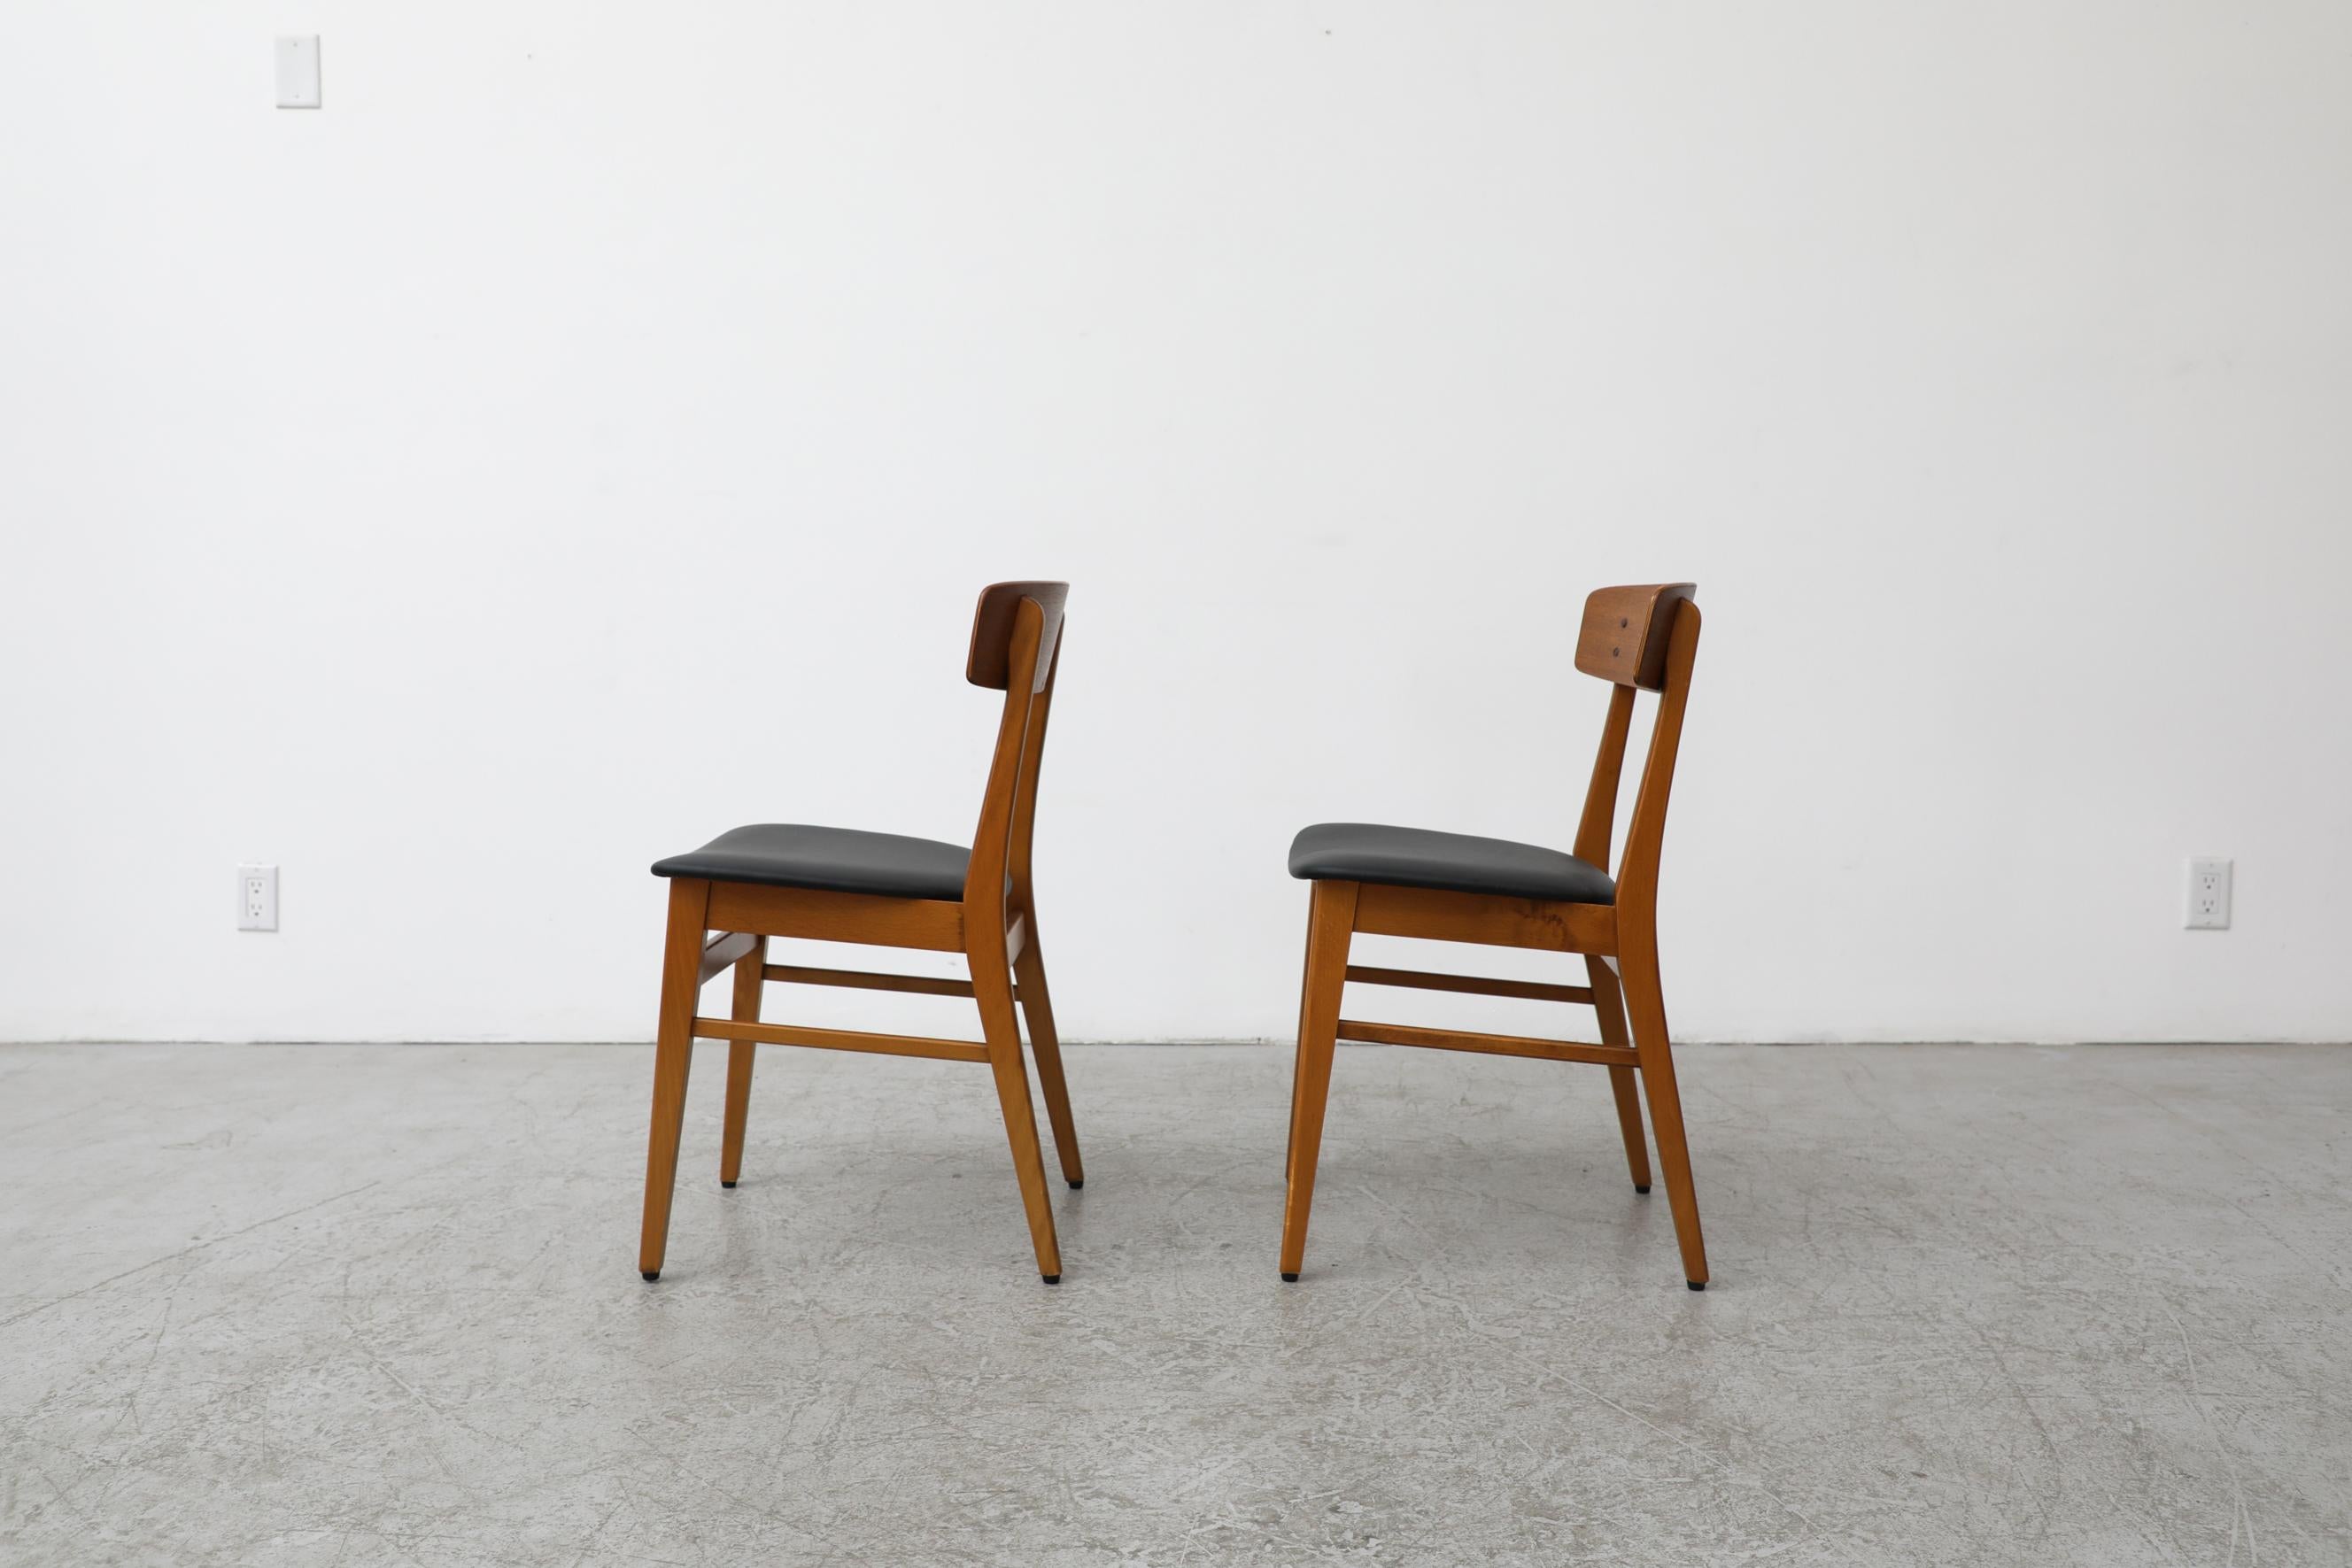 Mid-20th Century Pair of Borge Mogensen Style Danish Chairs by Farstrup with Black Skai Seats For Sale